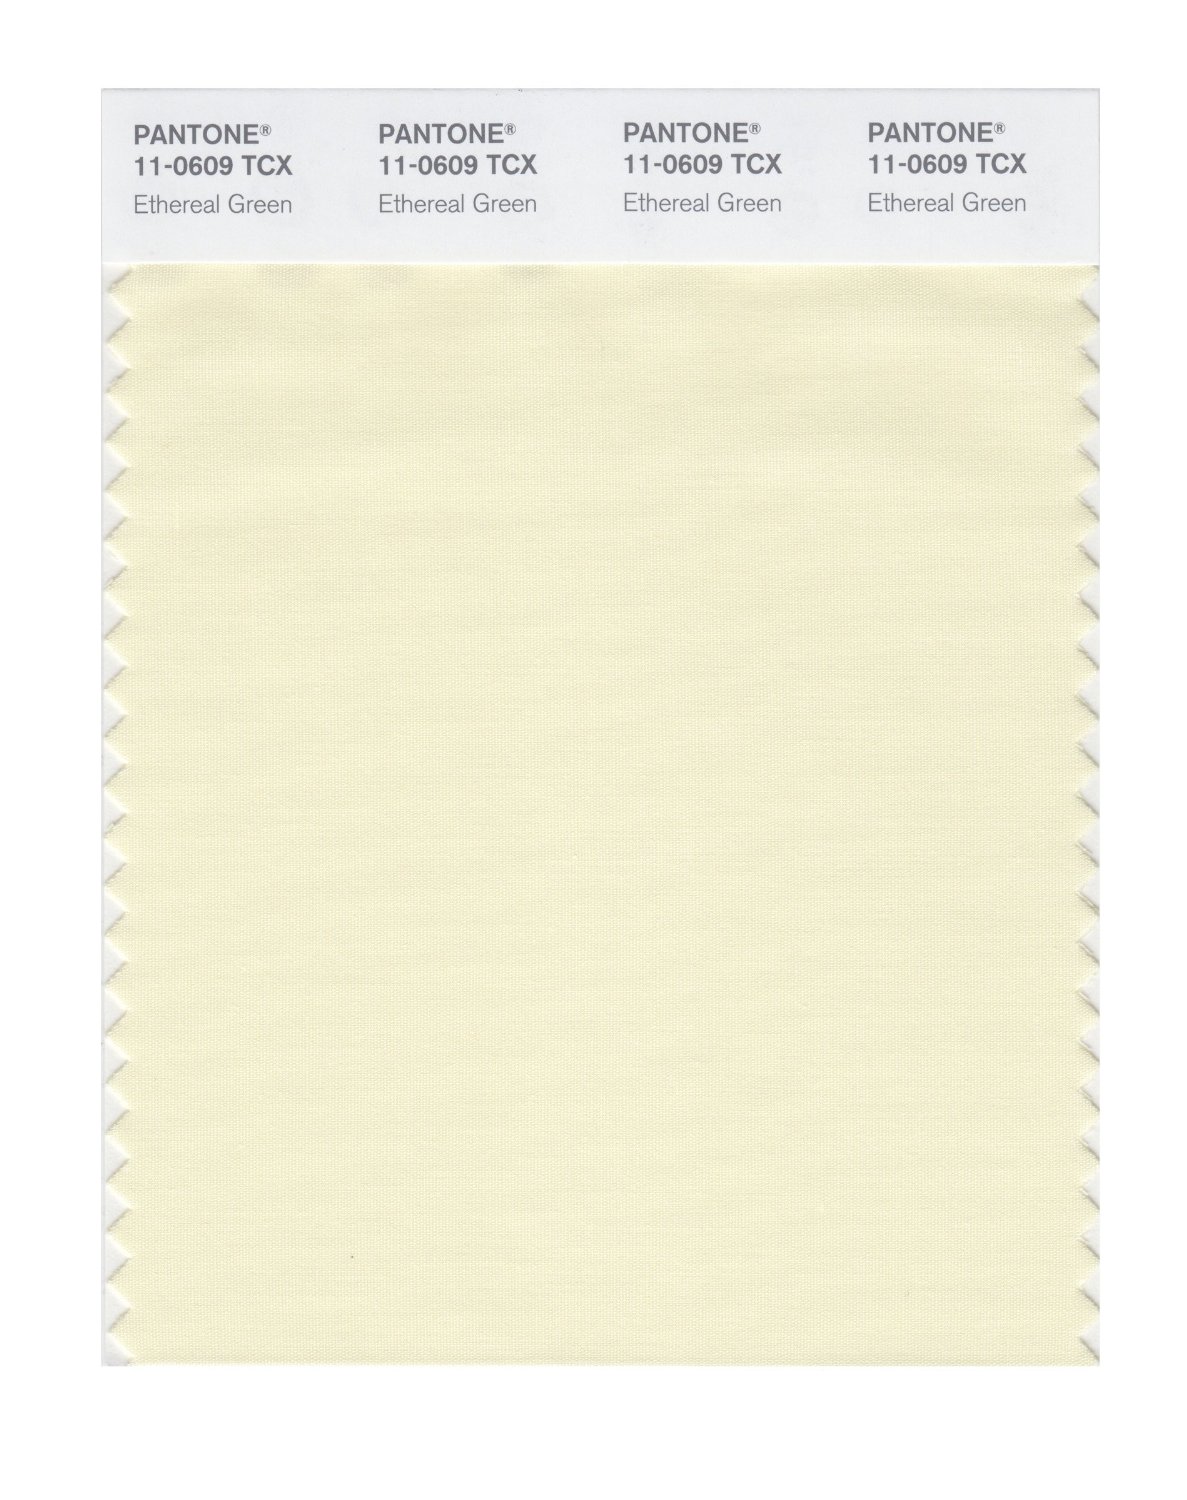 Pantone Cotton Swatch 11-0609 Etherial Green